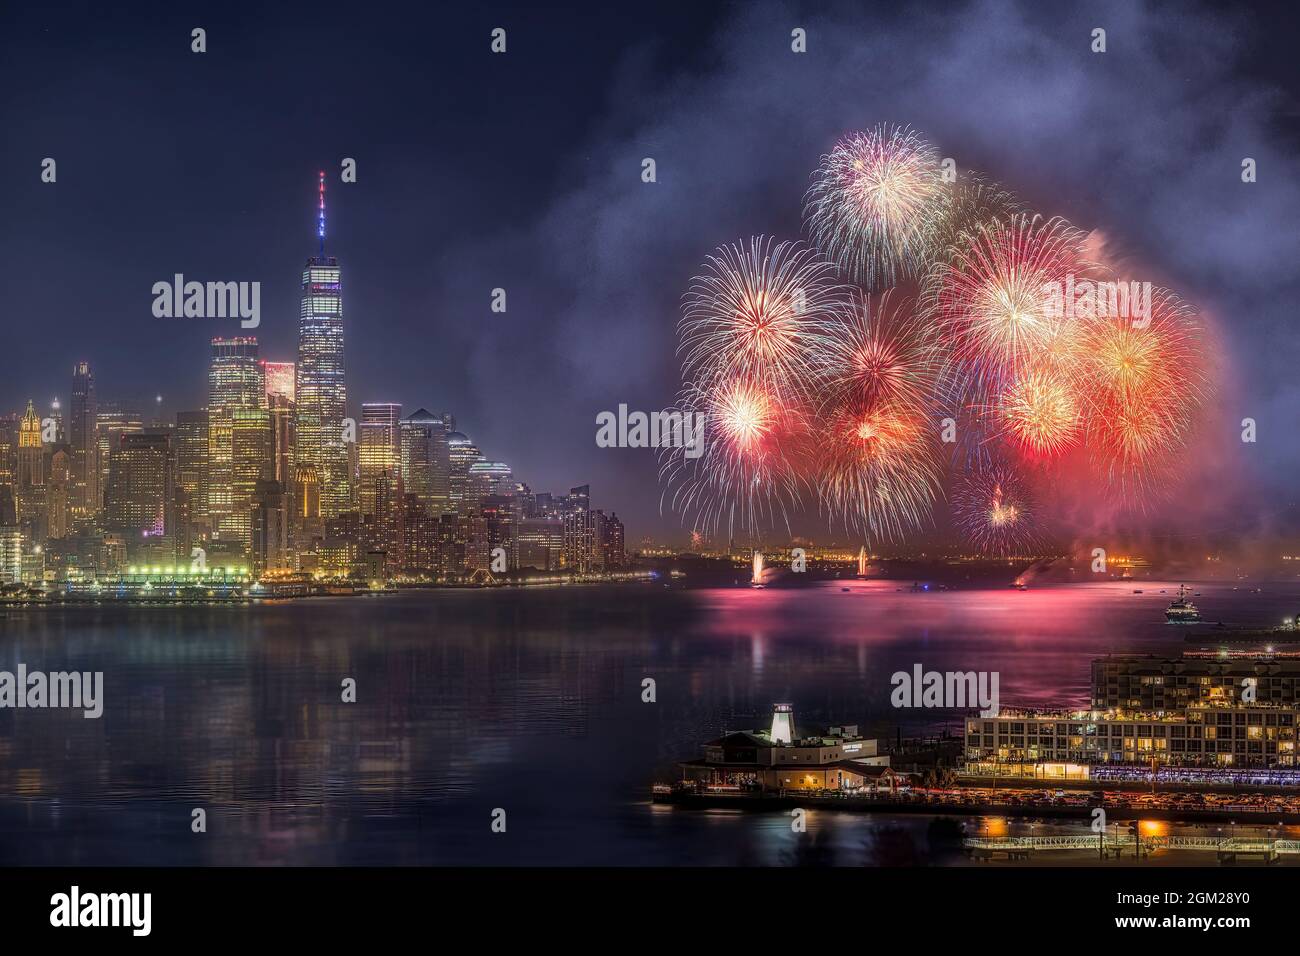 WTC NYC Fireworks - Jersey City, New Jersey fireworks by the New York City skyline with One World Trade Center and other buildings in lower Manhattan. Stock Photo